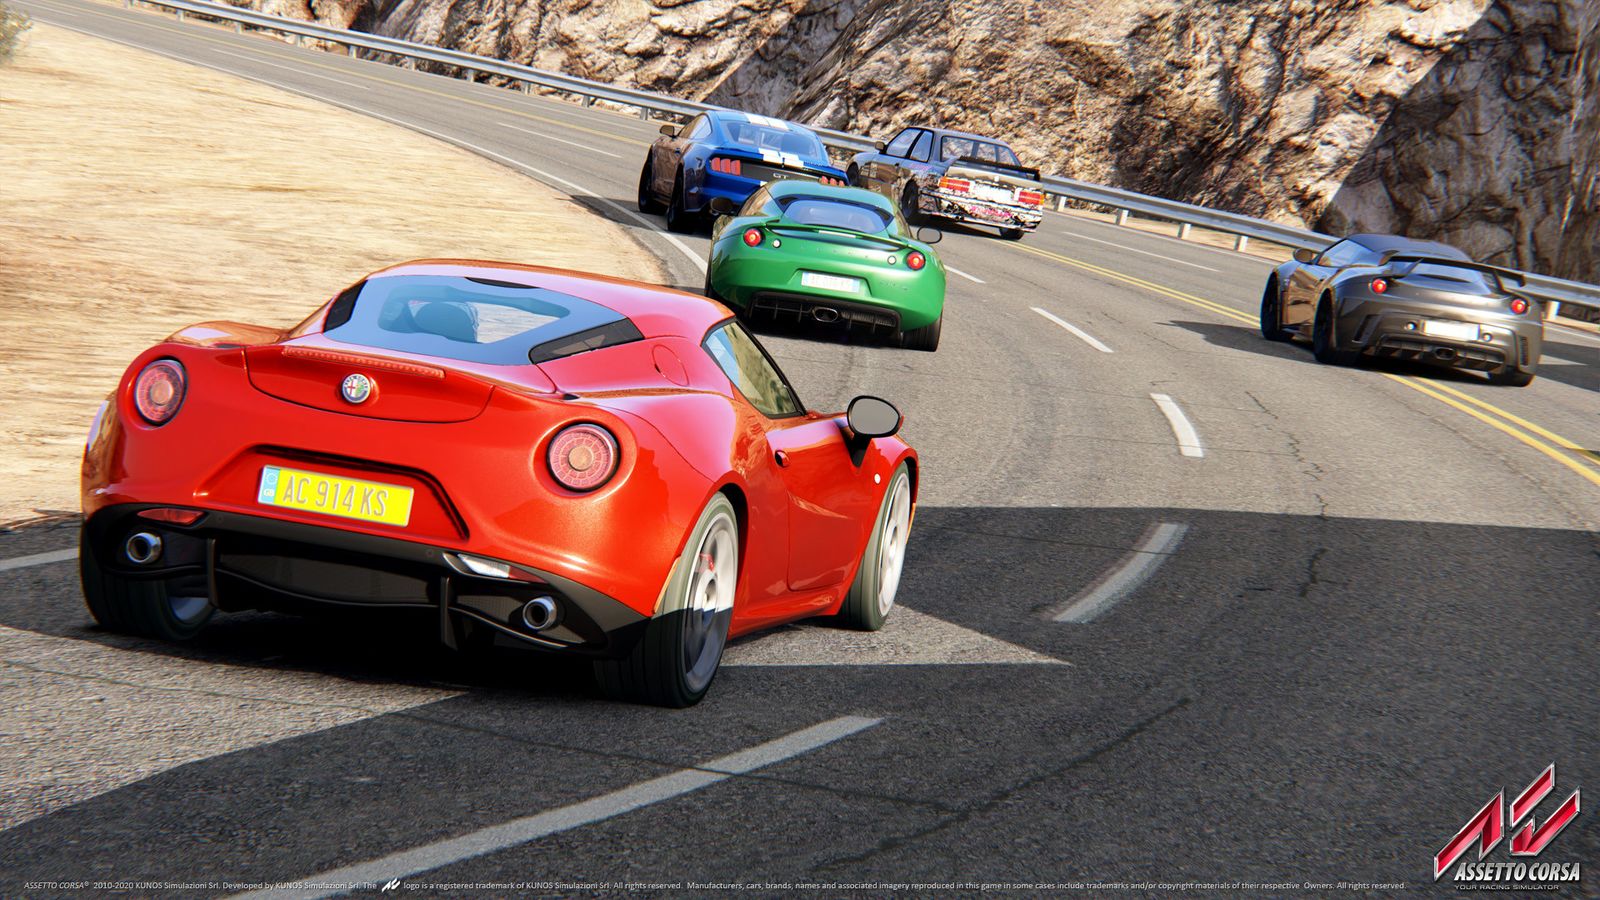 Assetto Corsa 2 gets a release window